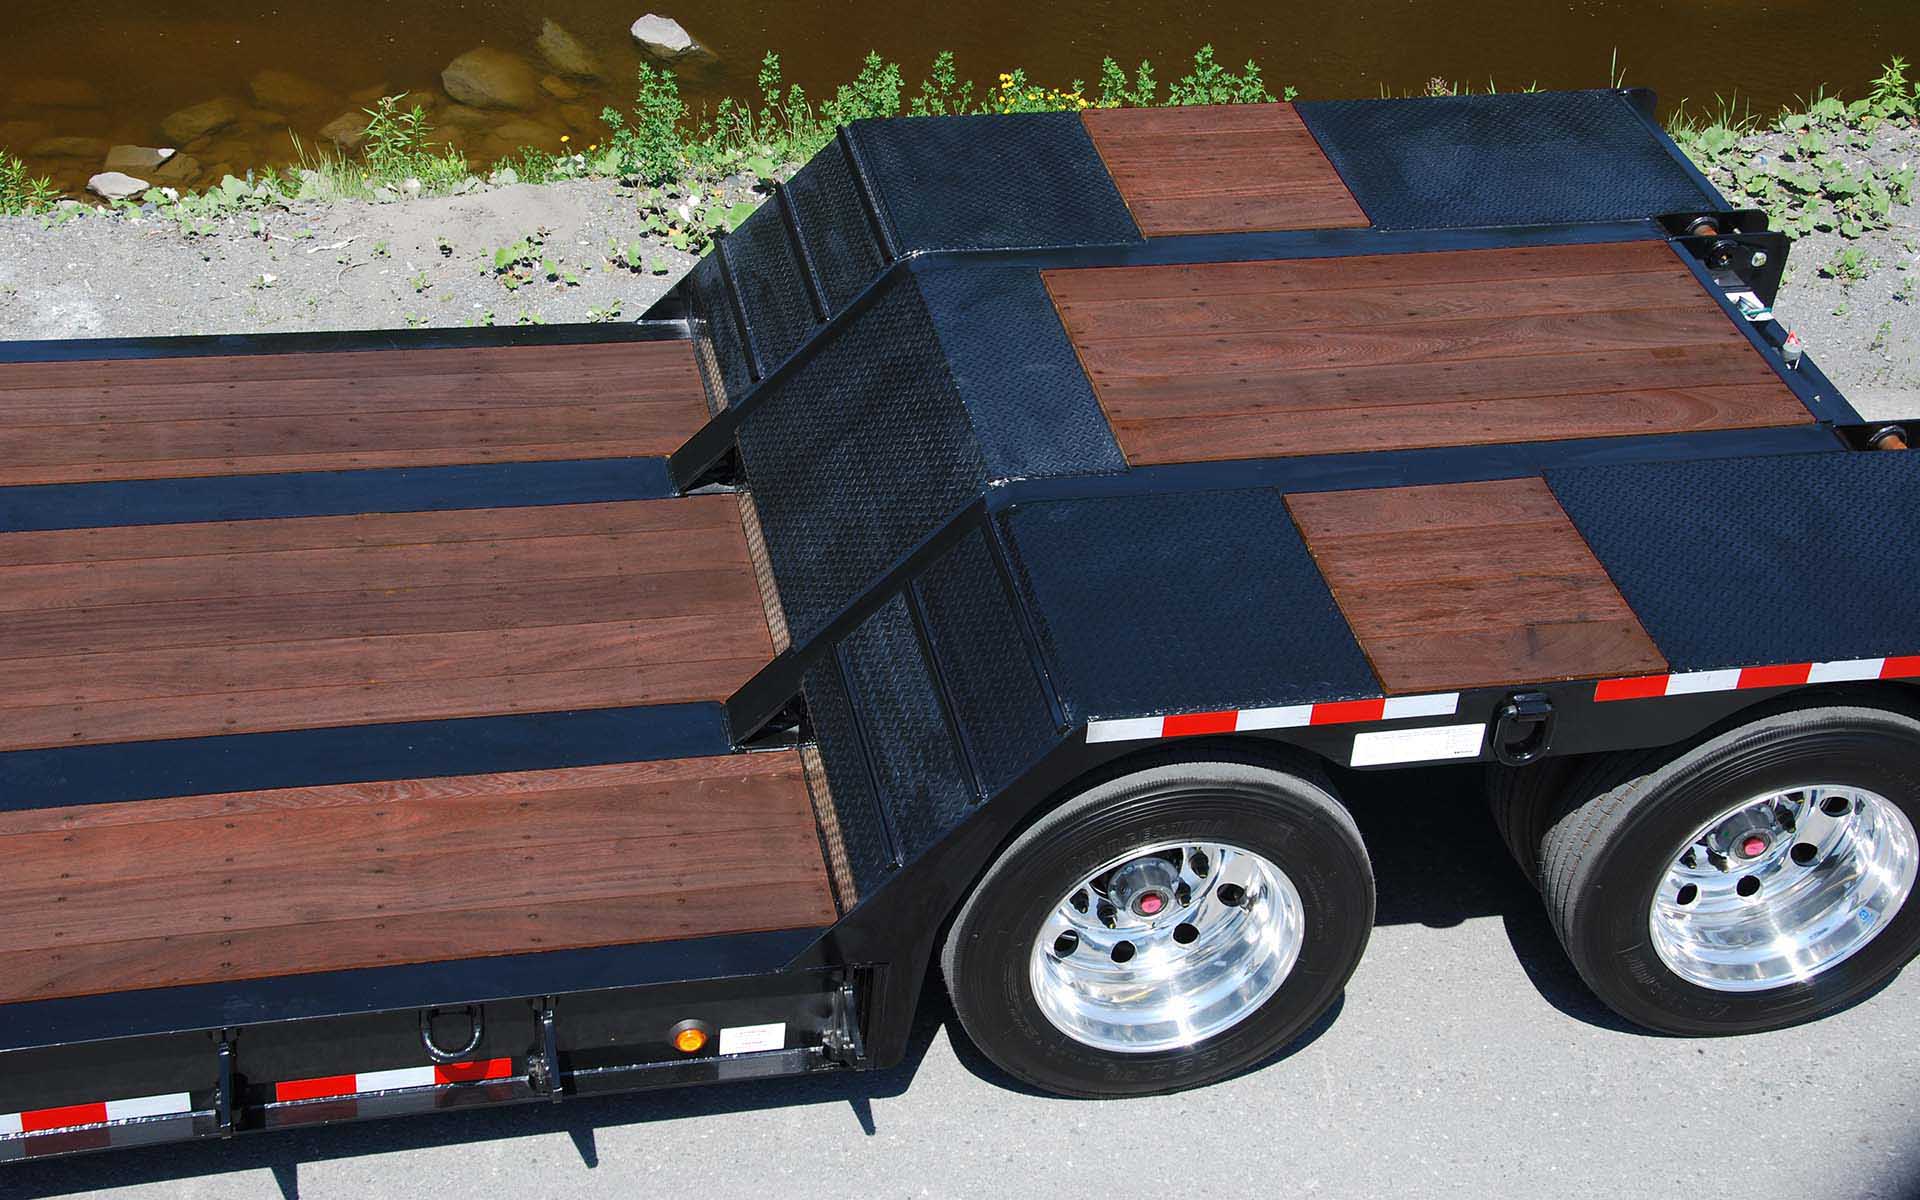 Manac Flatbed by River with APITONG OIL Exterior Oil Based Wood Stain